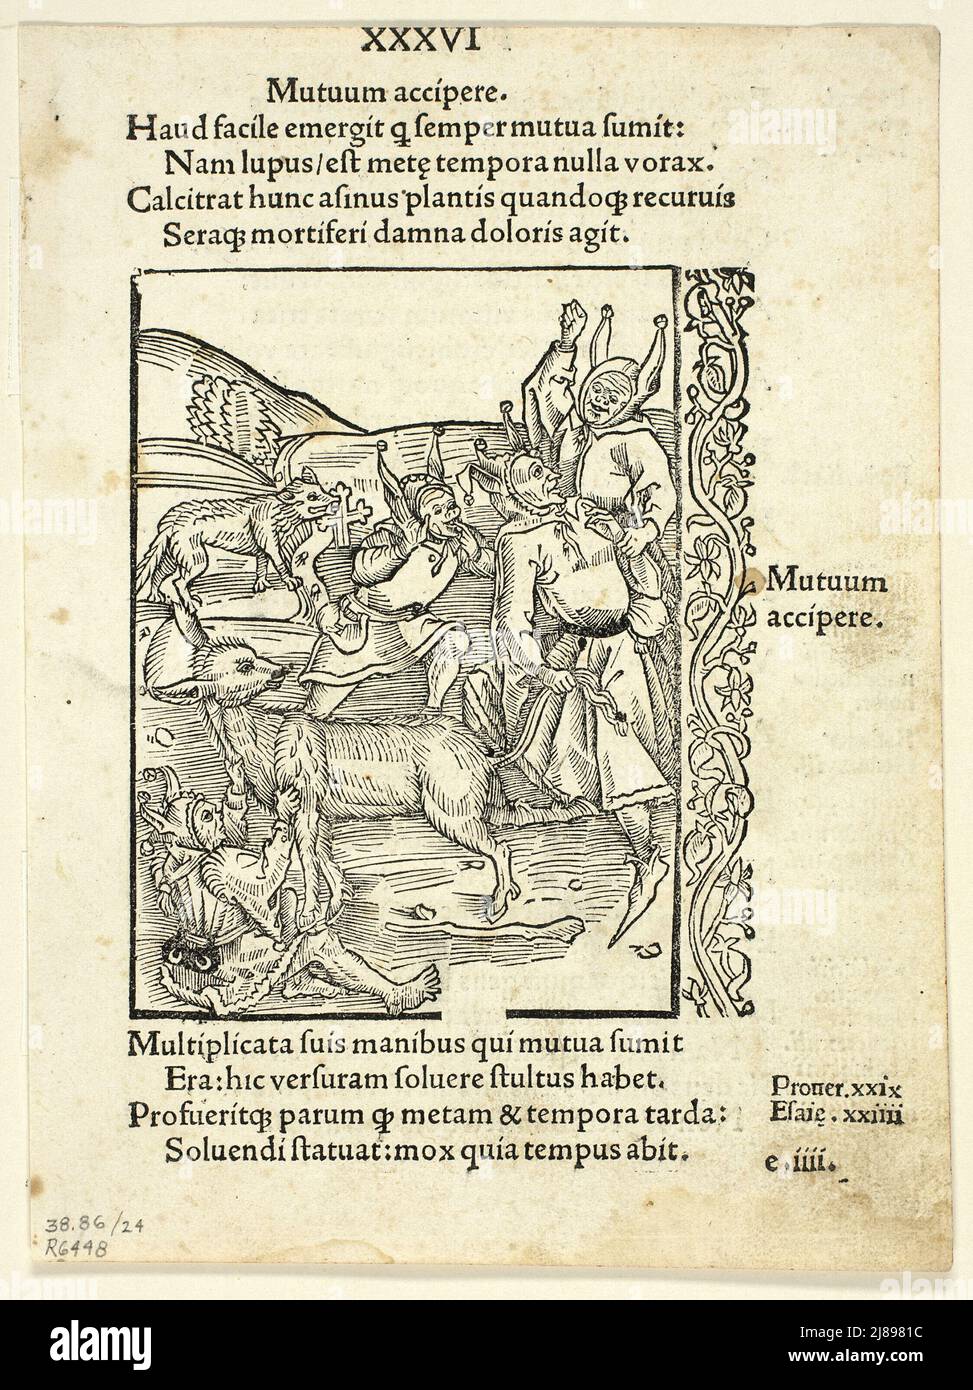 Raising Loans from Navis Stultifera (Ship of Fools), Plate 24 from Woodcuts from Books of the 15th Century, 1497, portfolio assembled 1929. Stock Photo